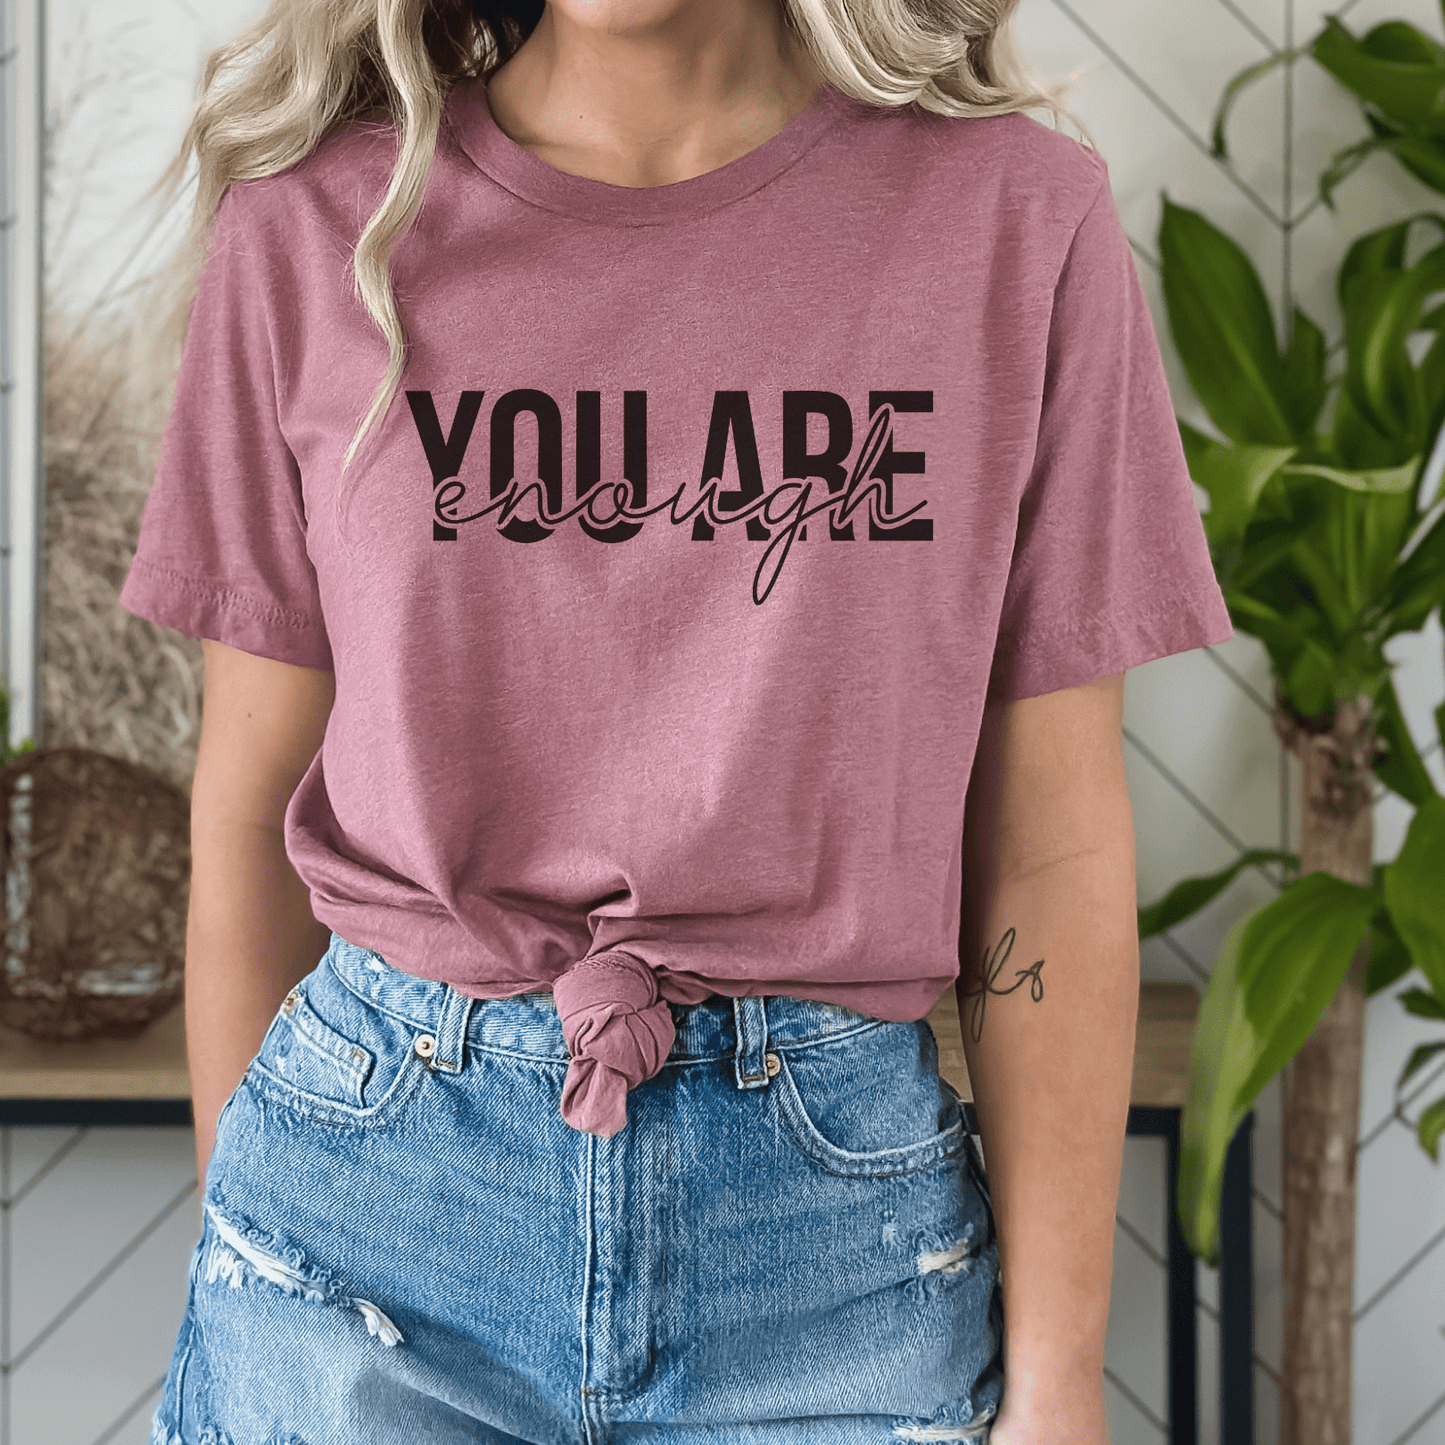 Envy Stylz Boutique Women - Apparel - Shirts - T-Shirts You Are Enough Graphic Tee